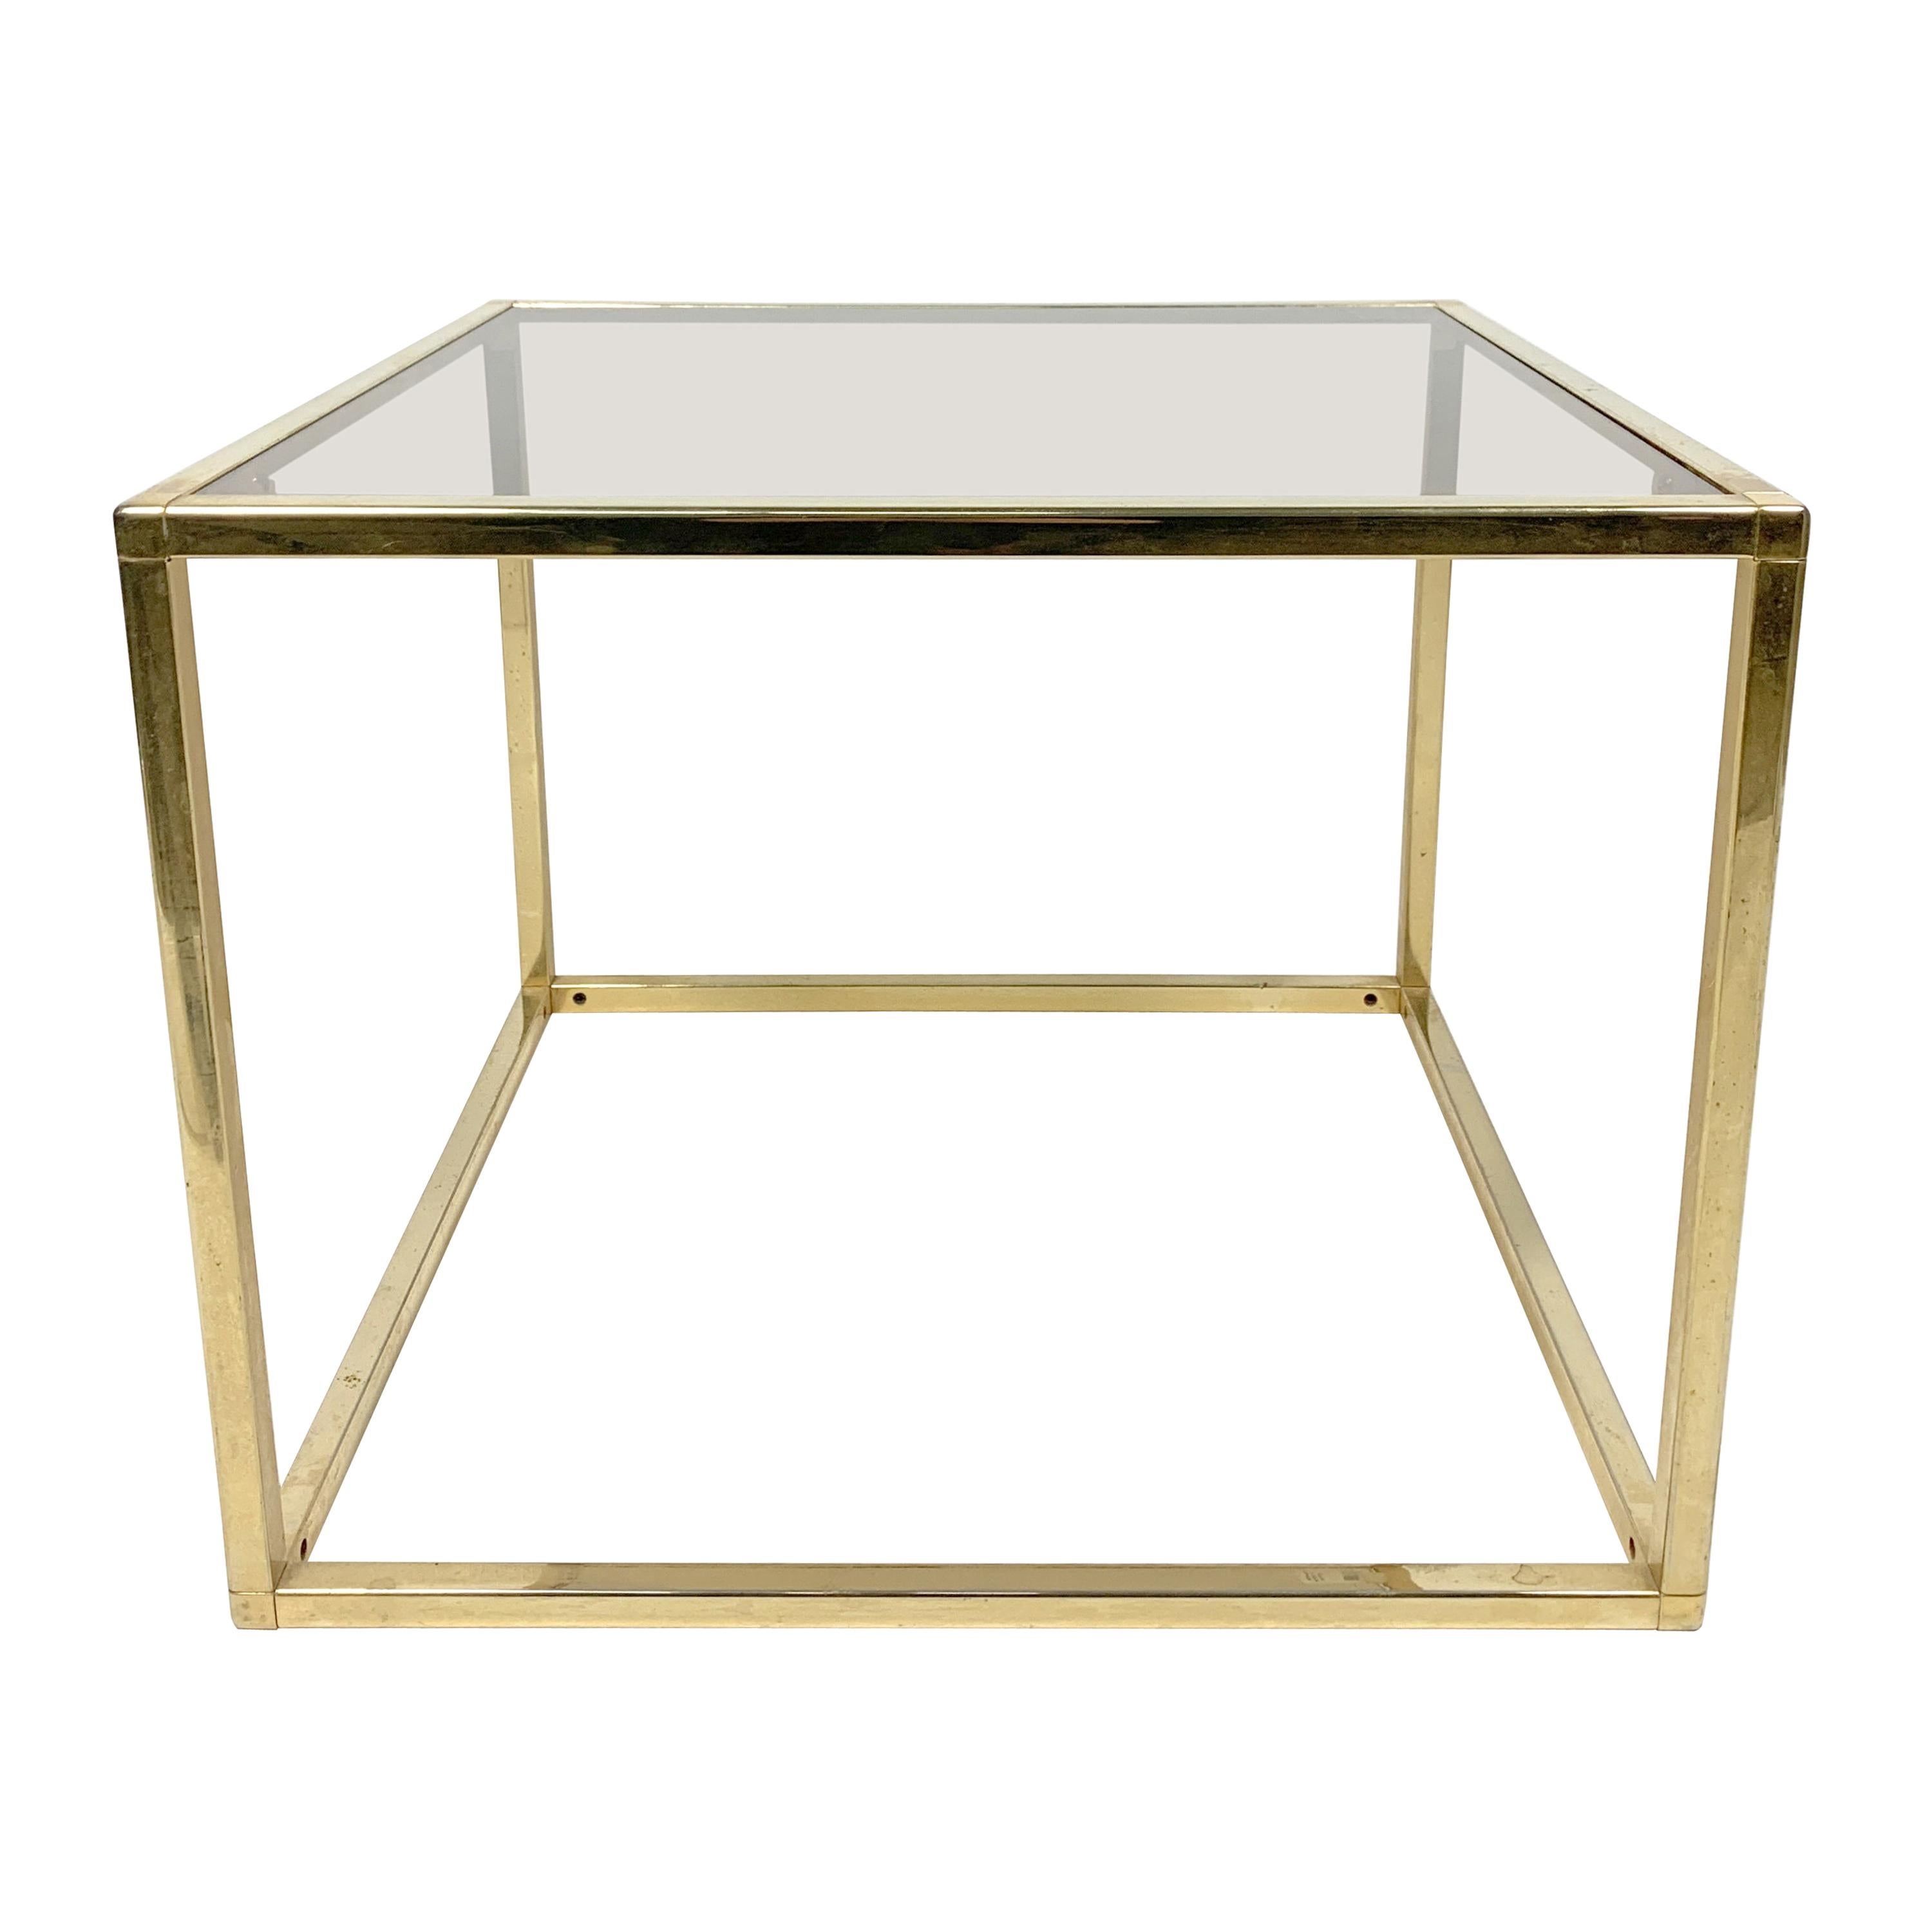 Brass-Plated Rectangular Small Table with Glass Top, 1970s